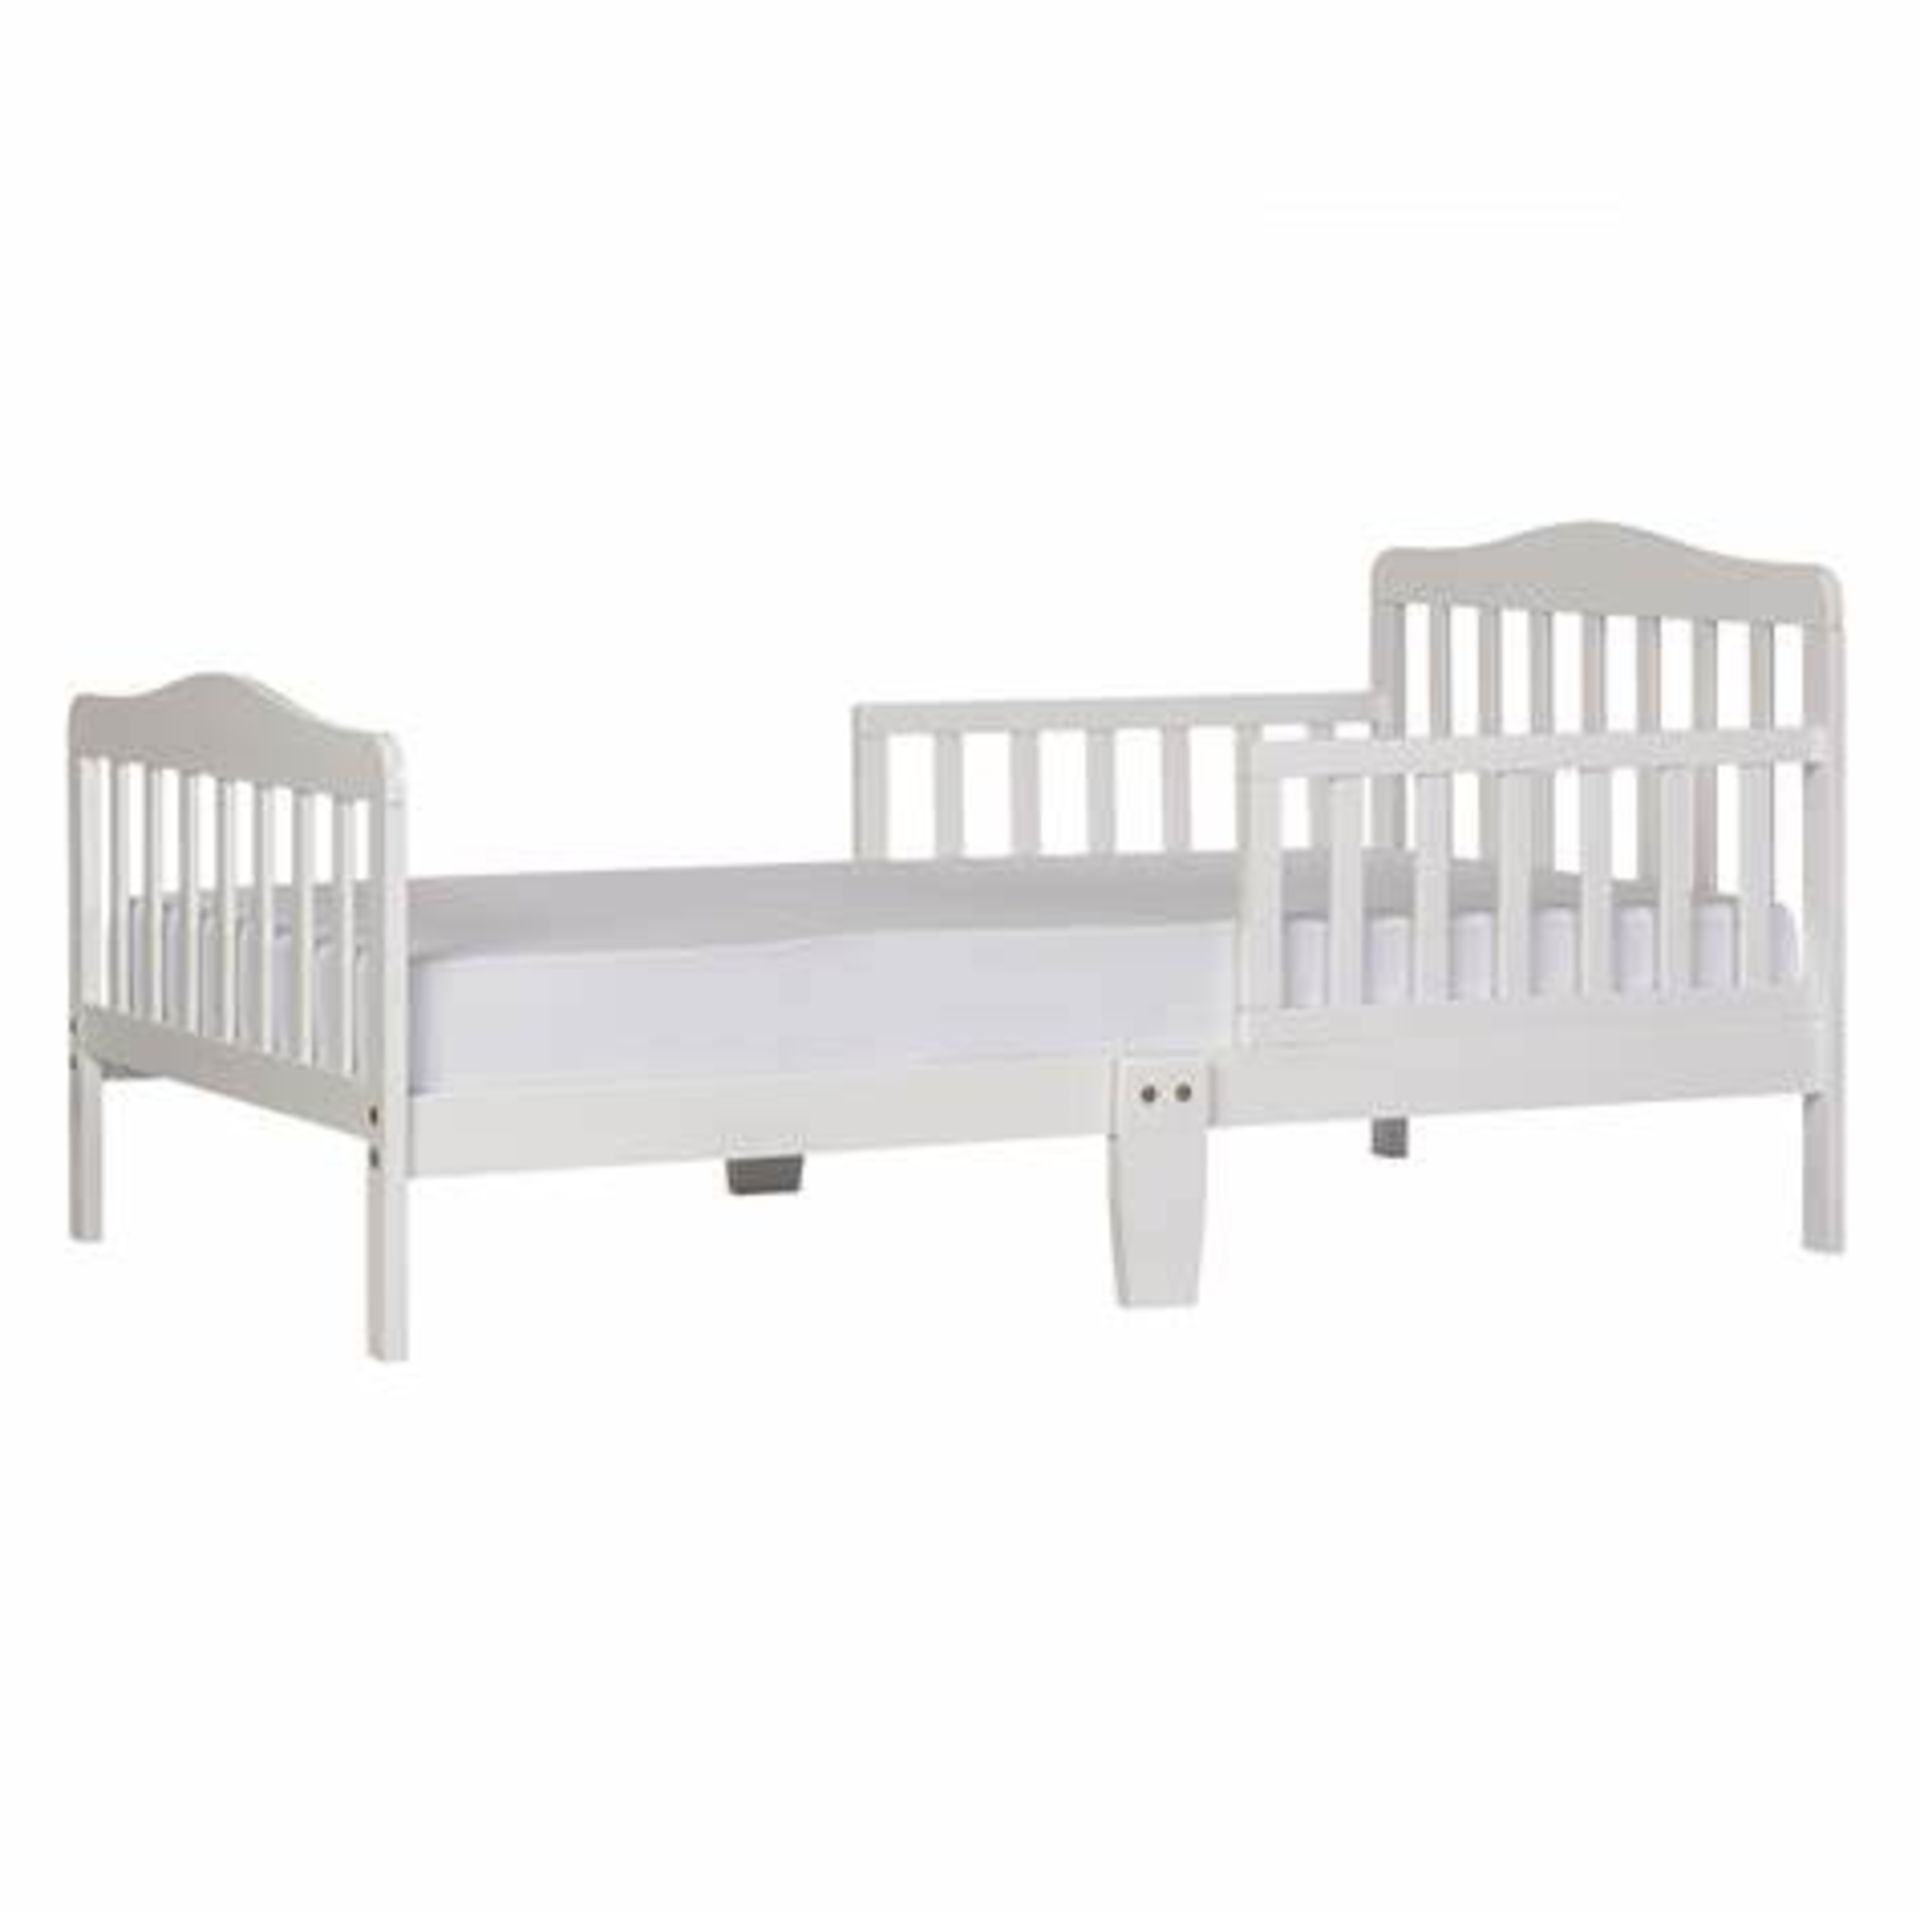 Brand New Dream on Me Classic Toddler Bed. Product dimensionS - 144.8L x 71.1W x 76.2H CM Comes with - Bild 3 aus 5